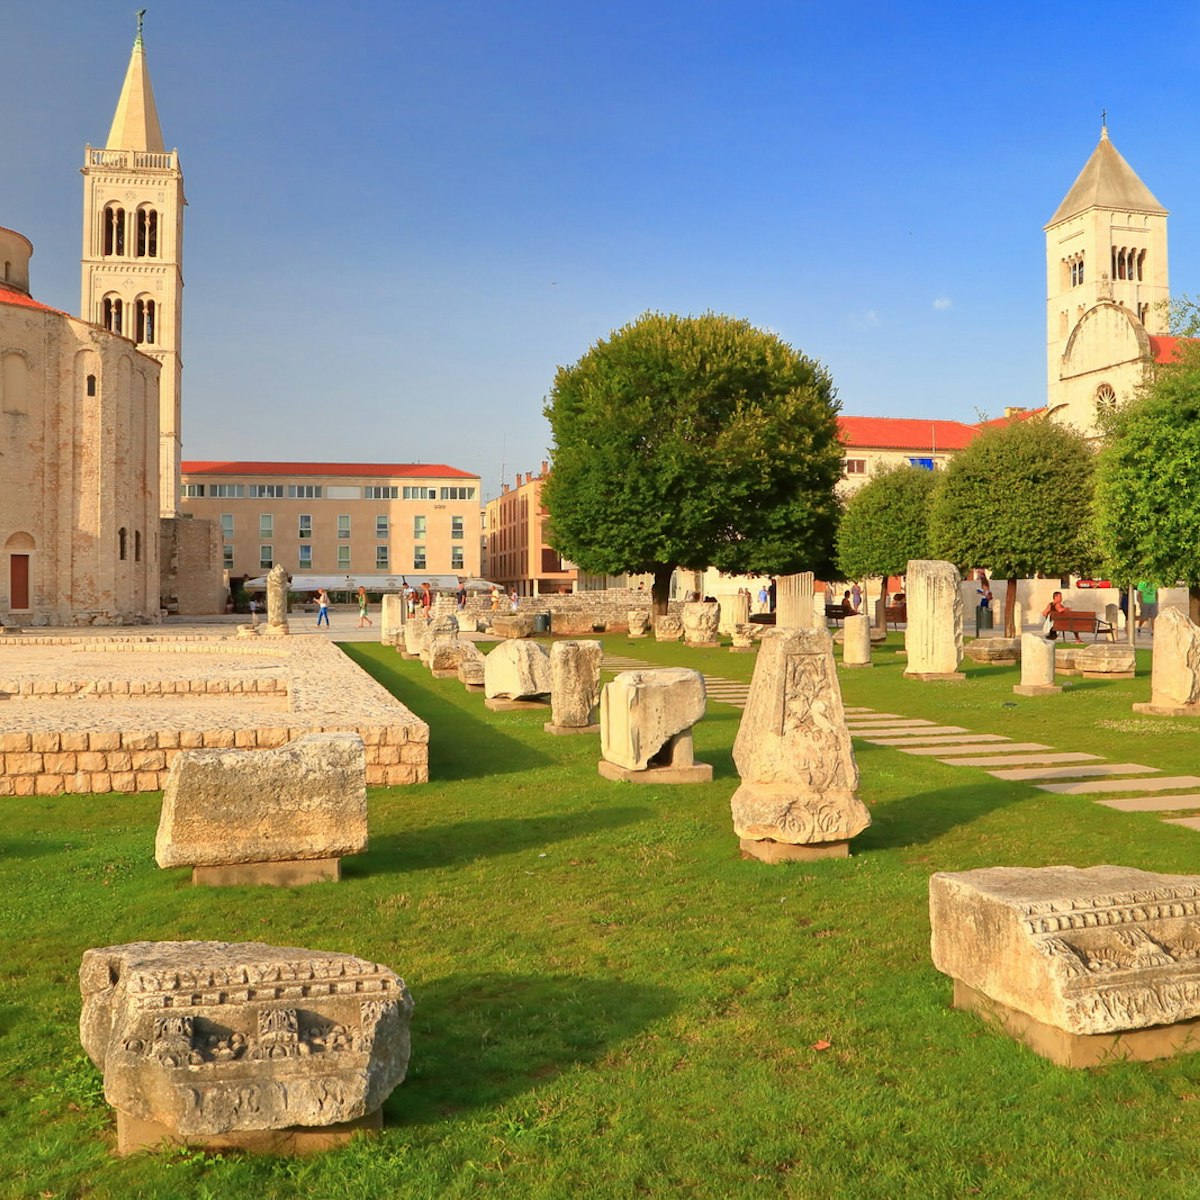 Roman forum and distant church inside old Venetian town, Zadar, Croatia; Shutterstock ID 218654365; Your name (First / Last): Emma Sparks; GL account no.: 65050; Netsuite department name: Online Editorial; Full Product or Project name including edition: Best in Europe POI updates